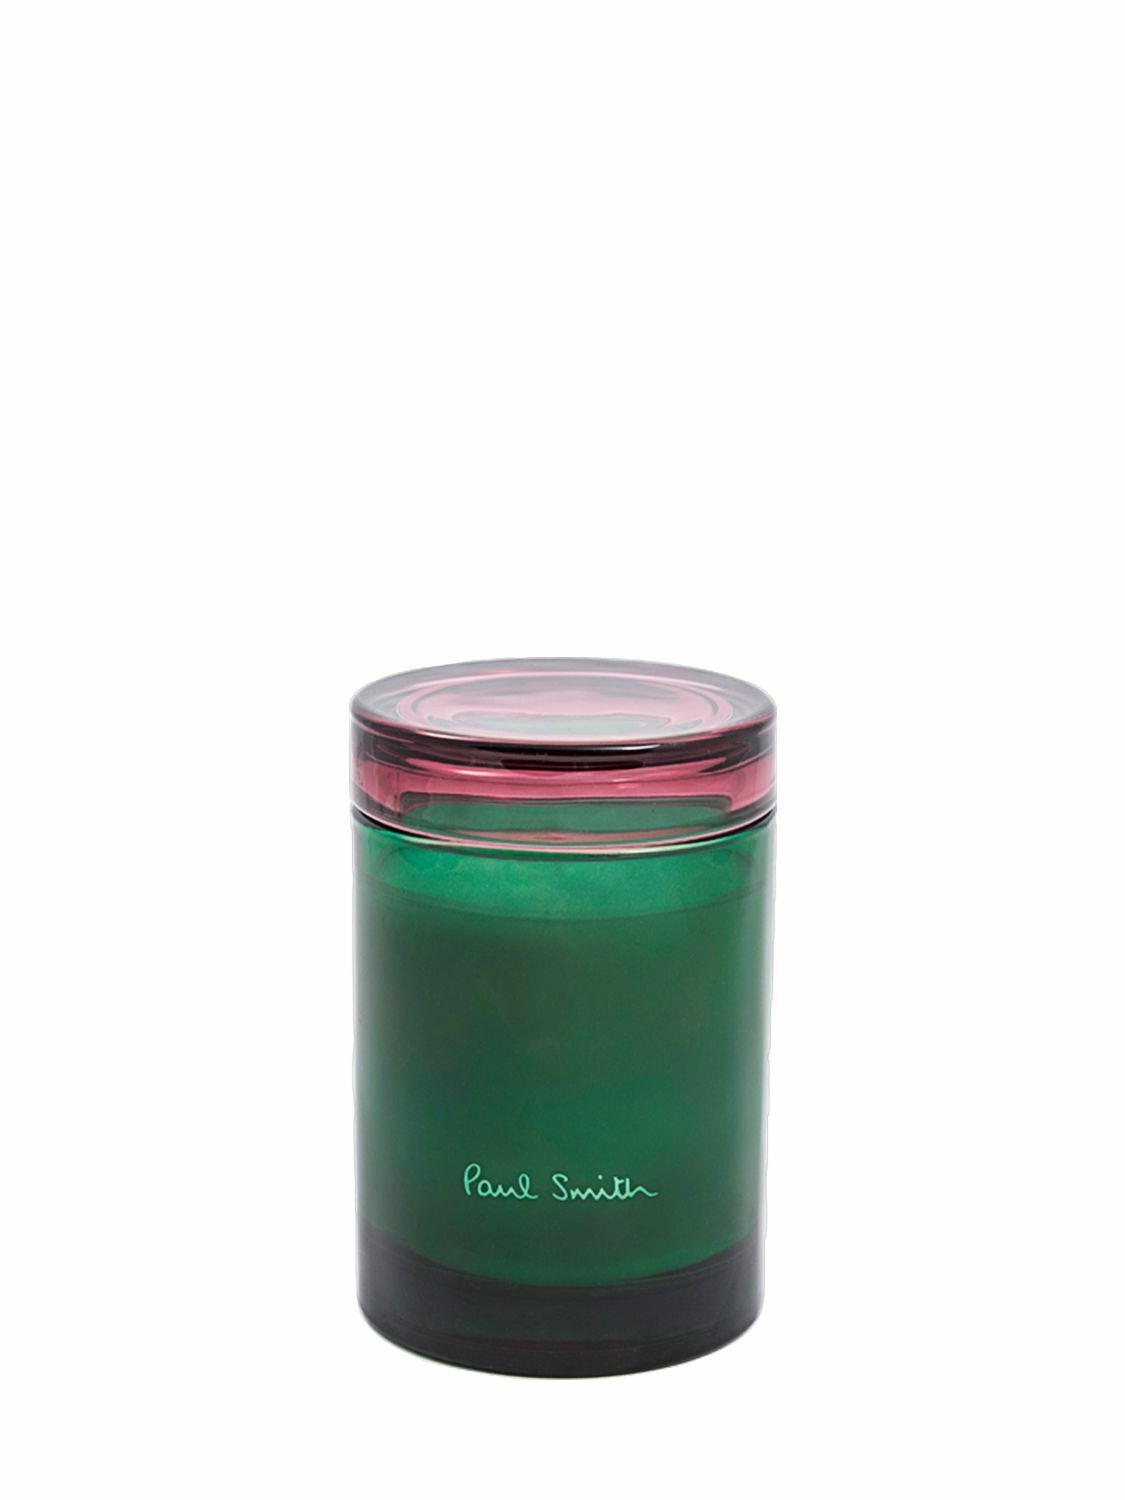 Photo: PAUL SMITH - 240gr Paul Smith Green Thumbed Candle